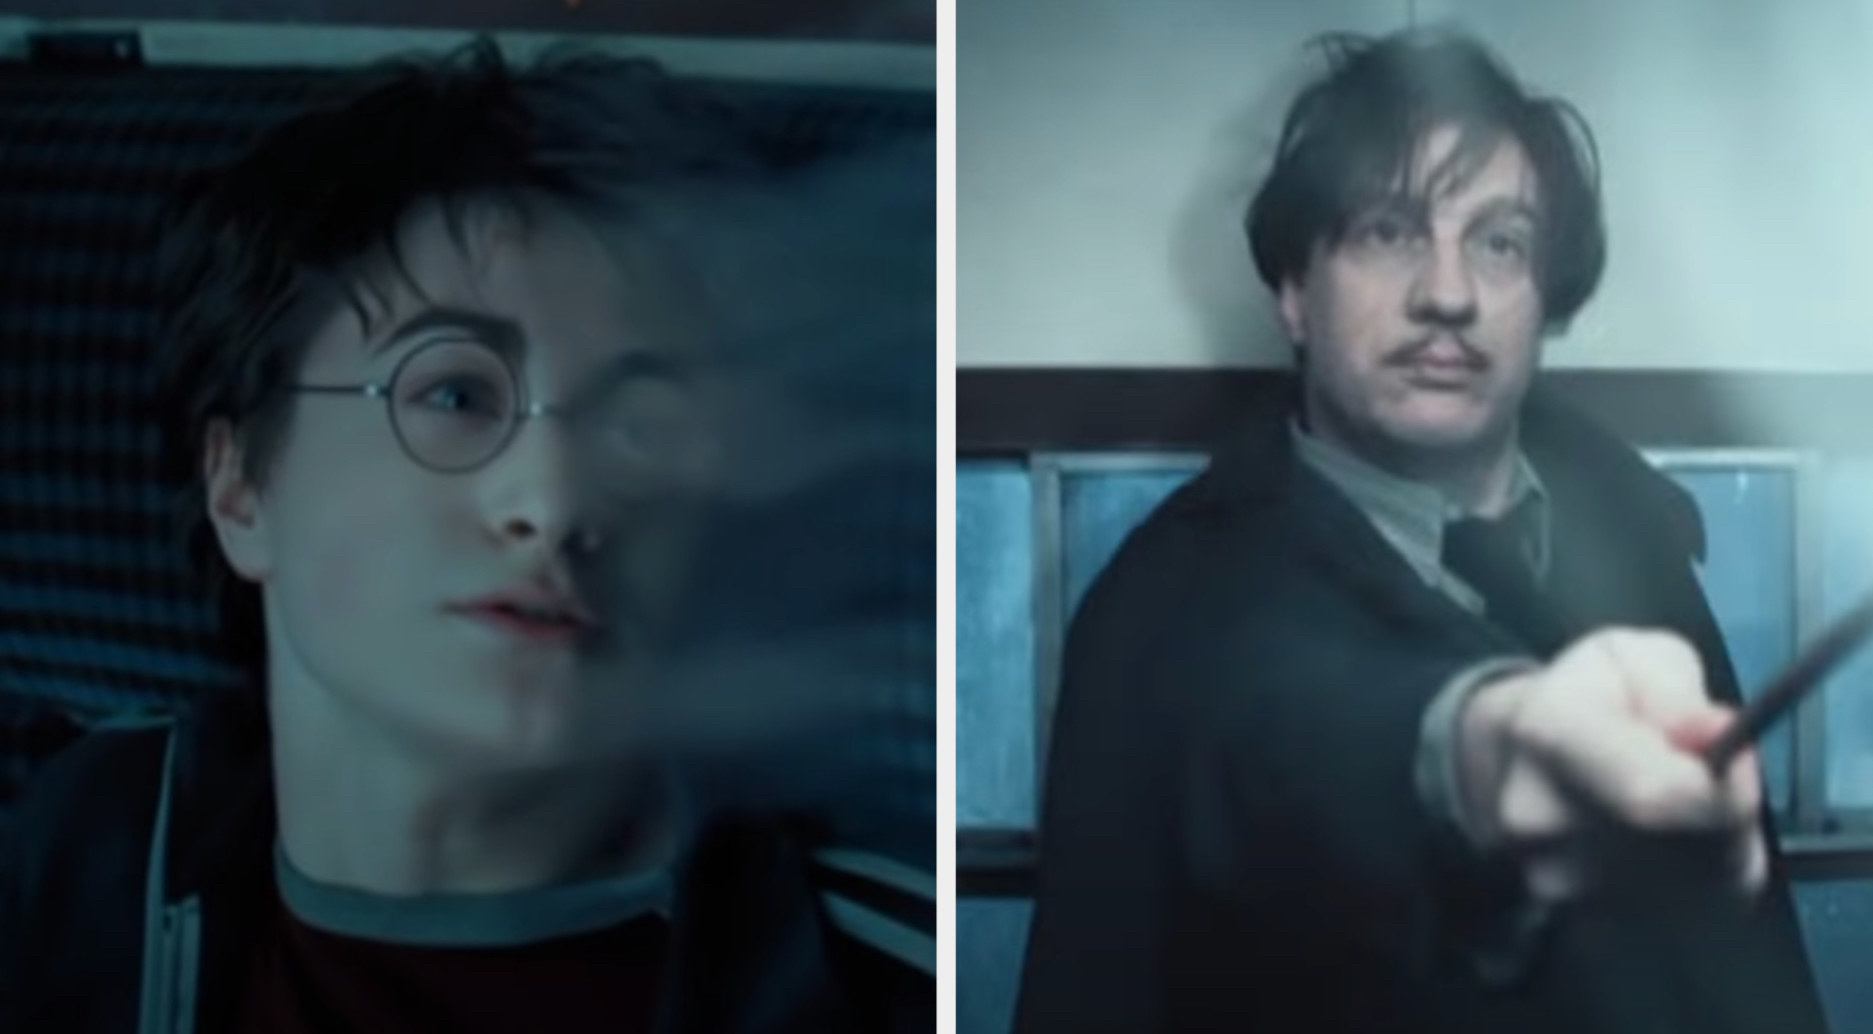 A dementor sucking the happiness out of Harry on the Hogwarts Express, and Lupin standing up with determination to curse the dementor away